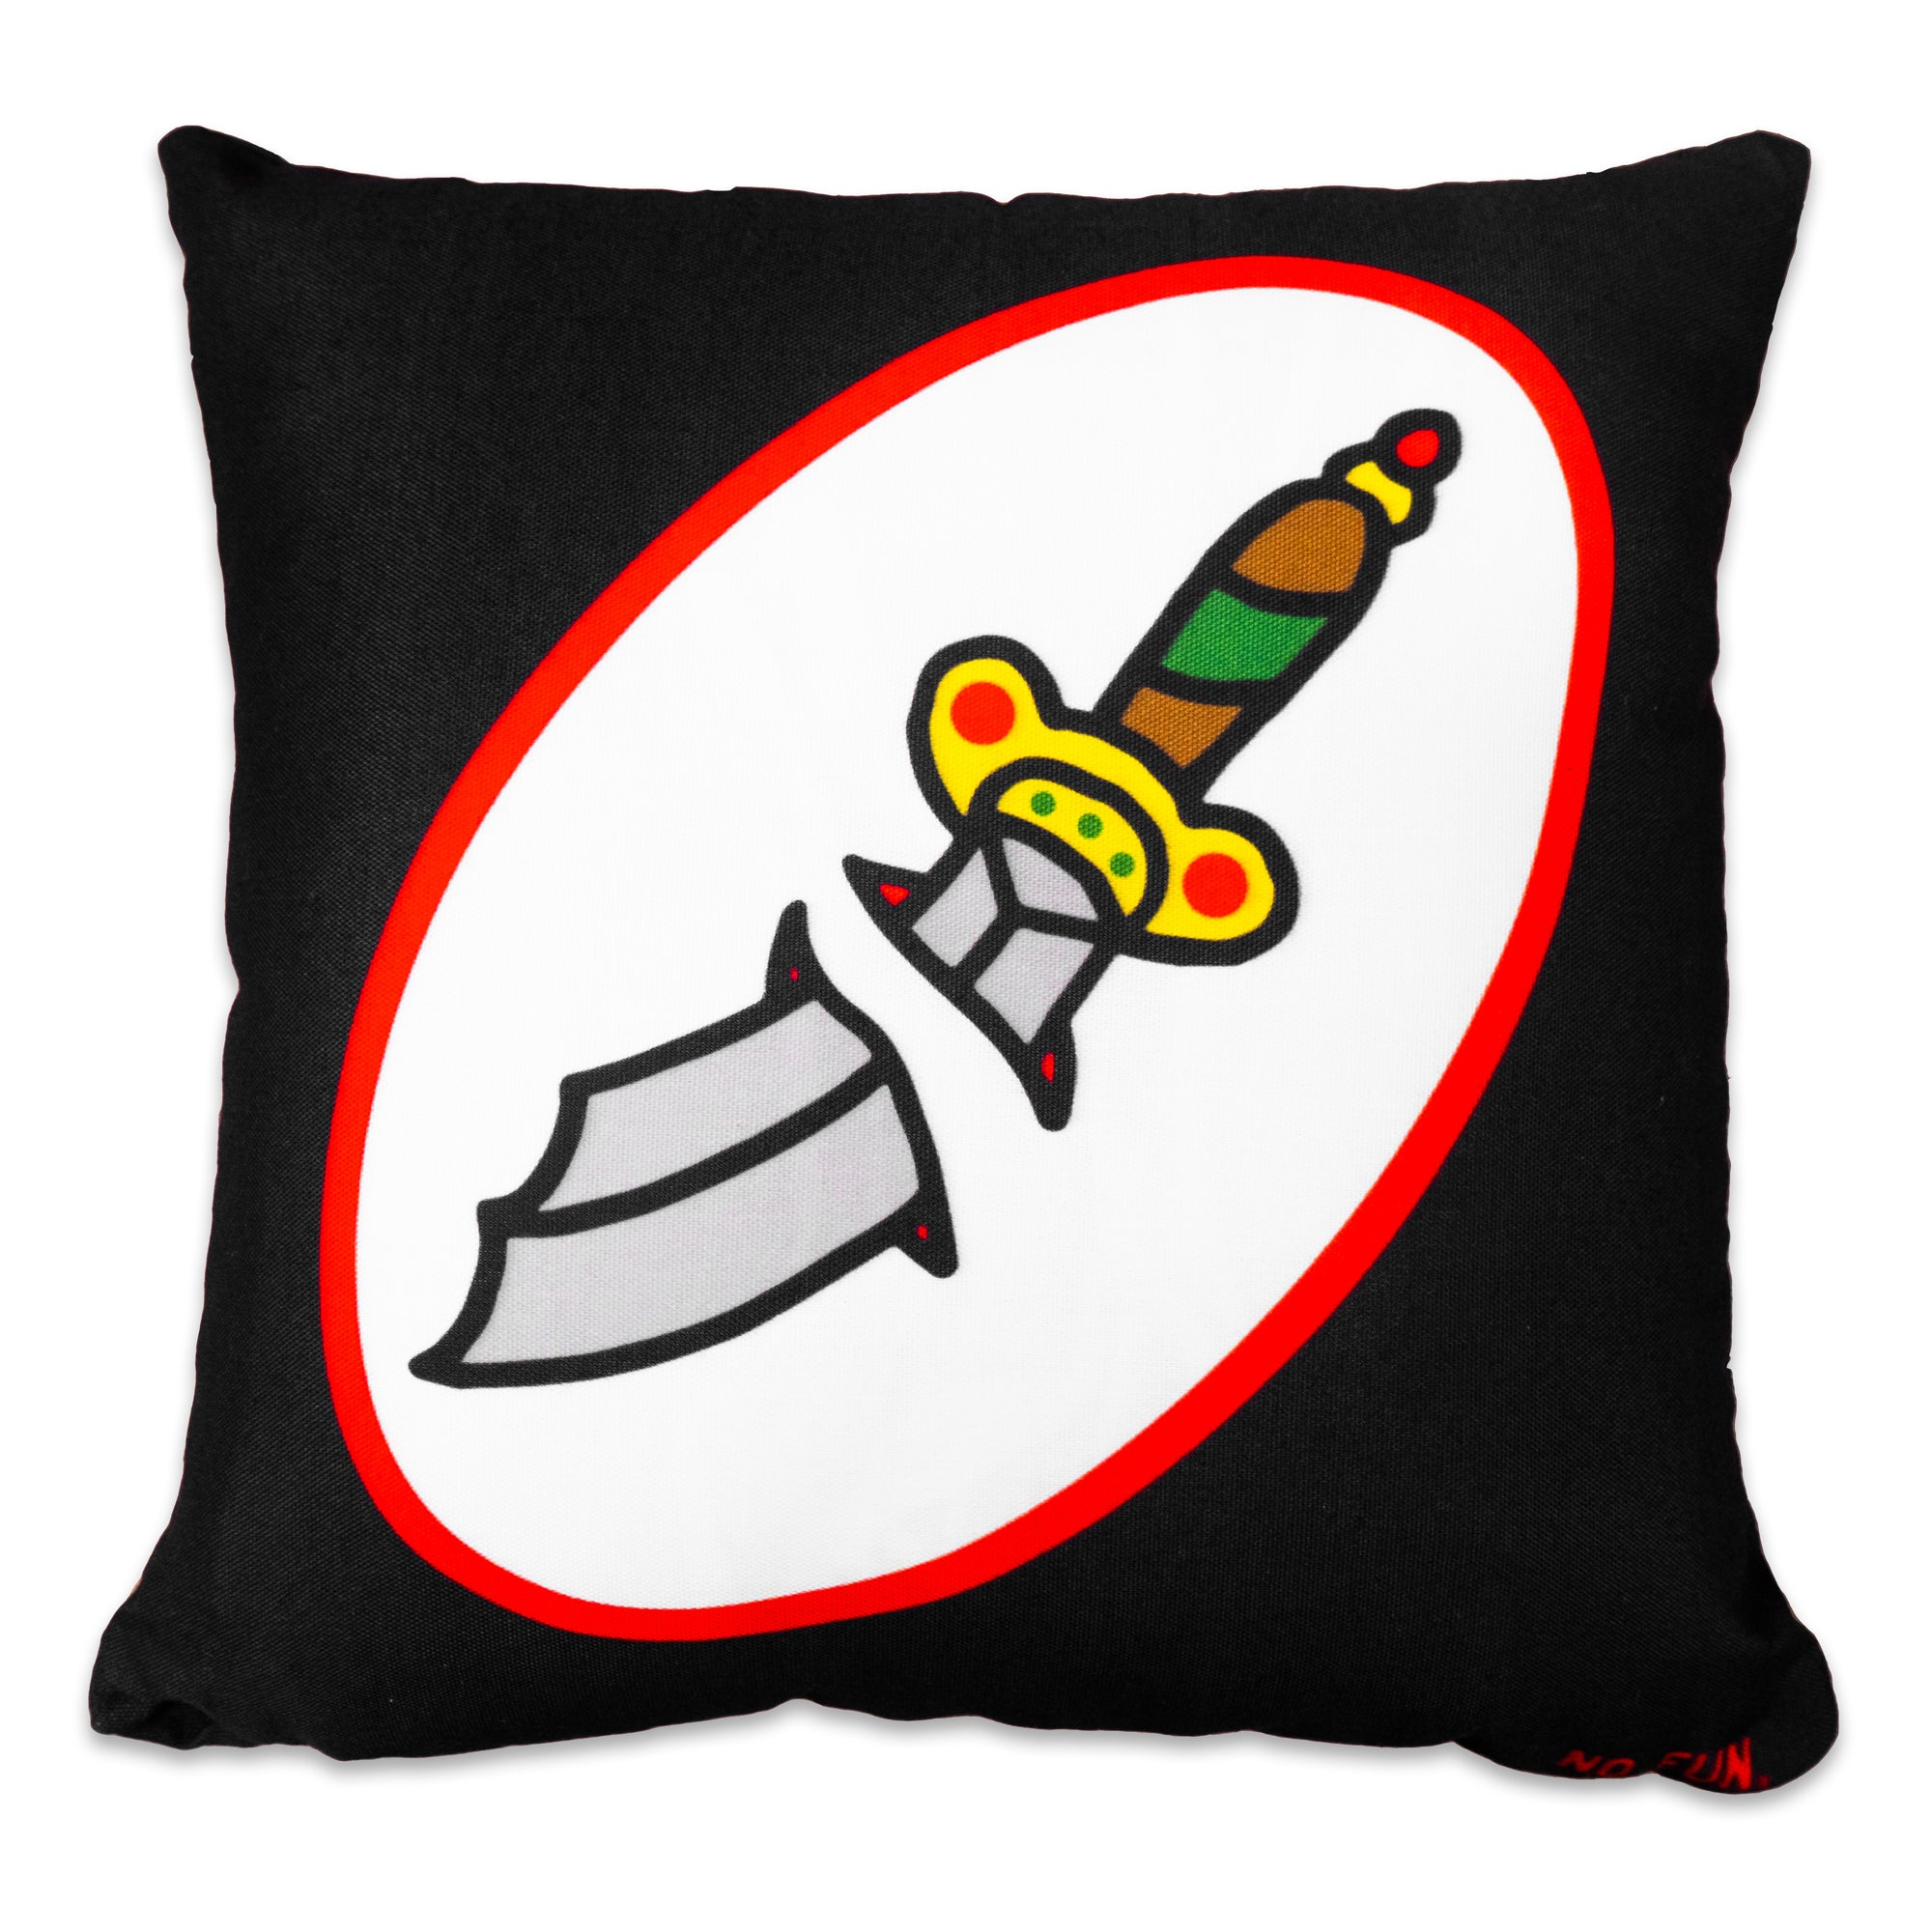 The "Sword & Rose" Pillow by No Fun®. Pillow is black, with a double sided design. One side has a red and white oval, with a cartoon sword in the center. The sword is in two pieces, appearing as if it is piercing through the center of the oval. There is a small, red, "No Fun®" logo in the bottom right hand corner of the pillow.